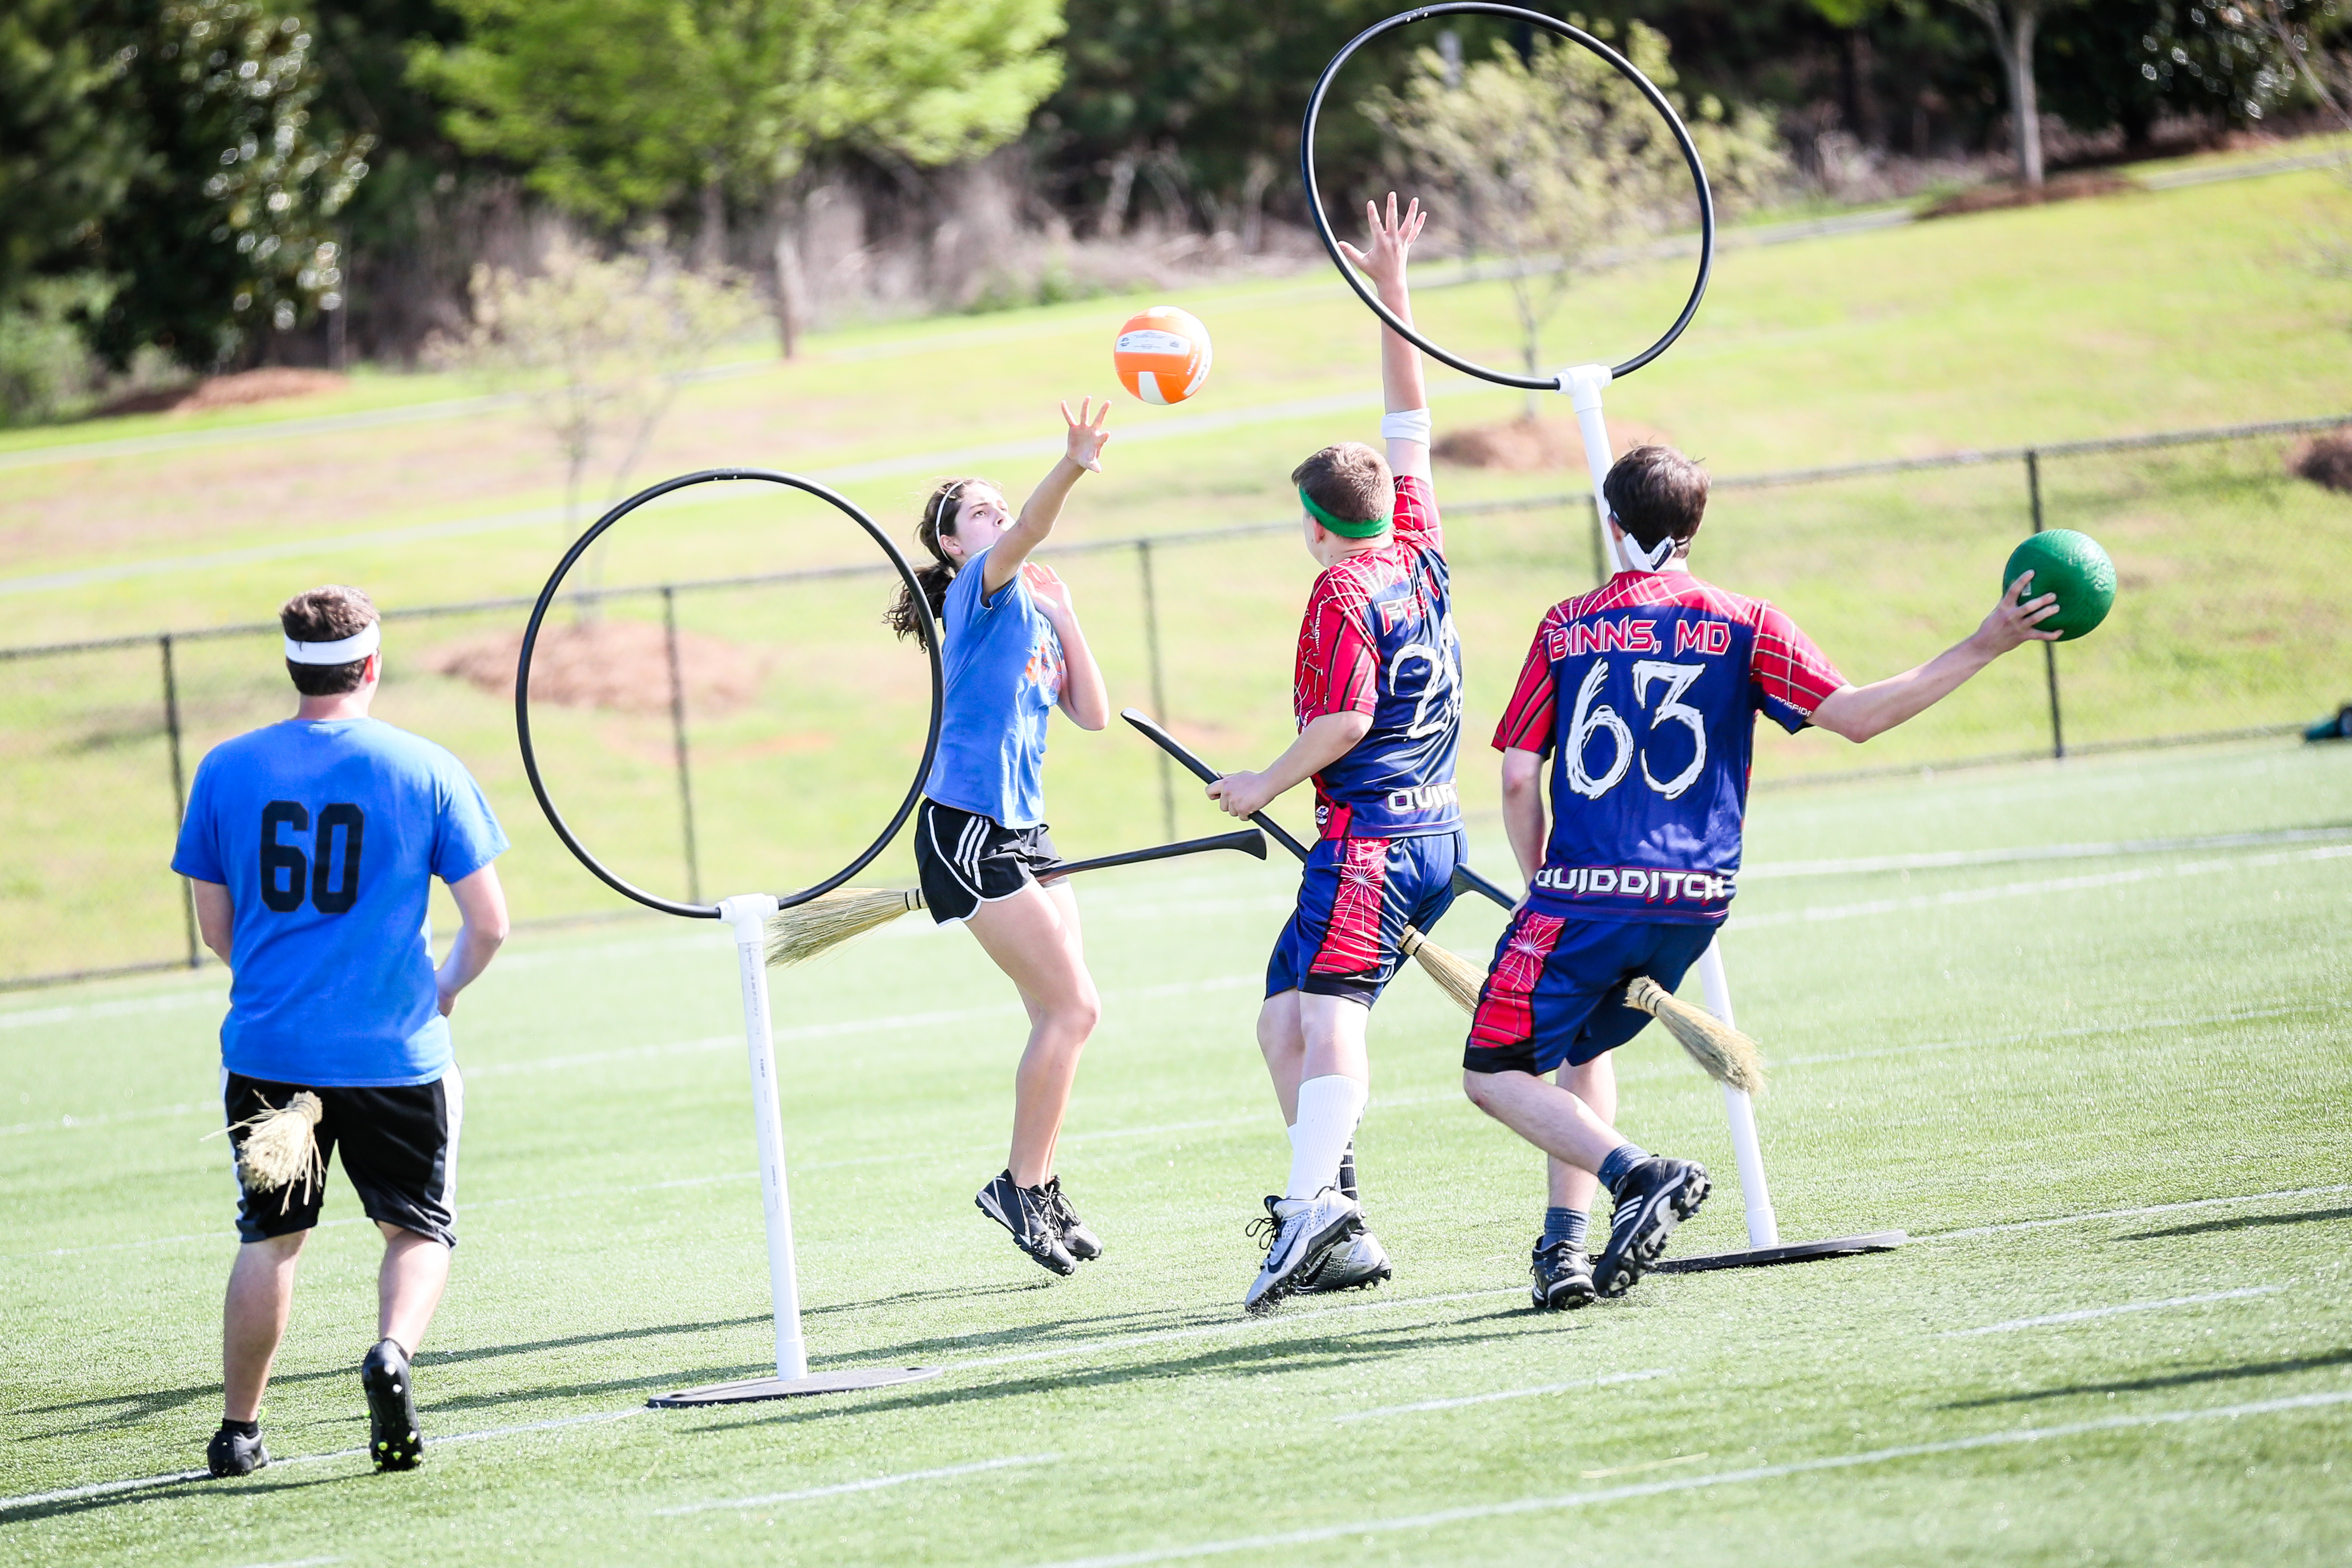 Players battle over quidditch